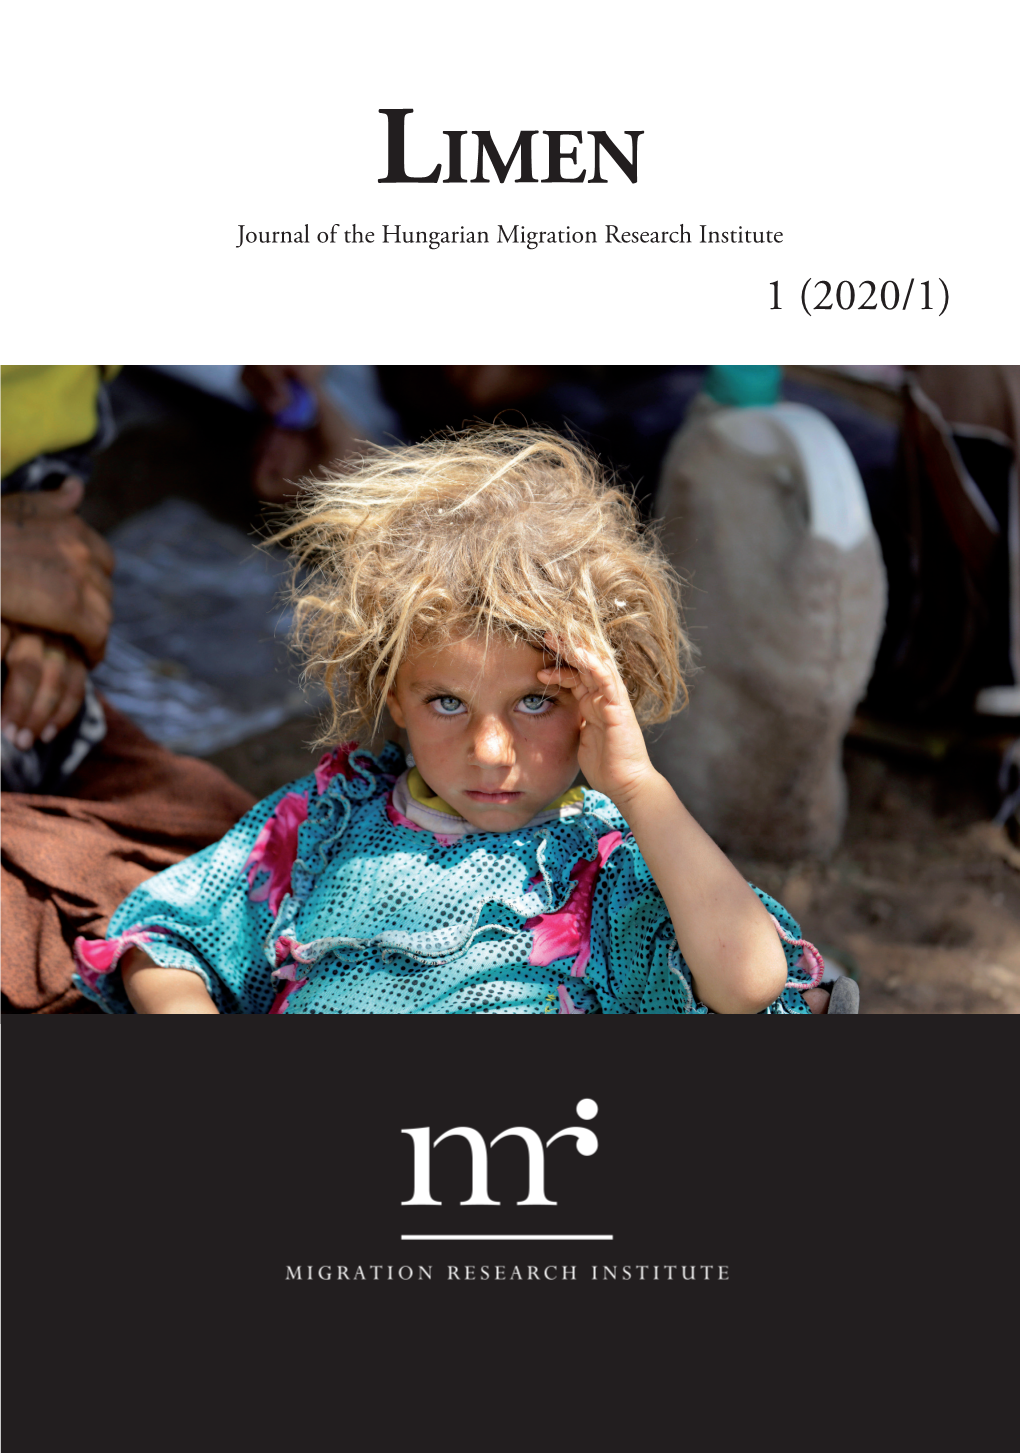 Journal of the Hungarian Migration Research Institute 1 (2020/1) Li M E N Journal of the Hungarian Migration Research Institute